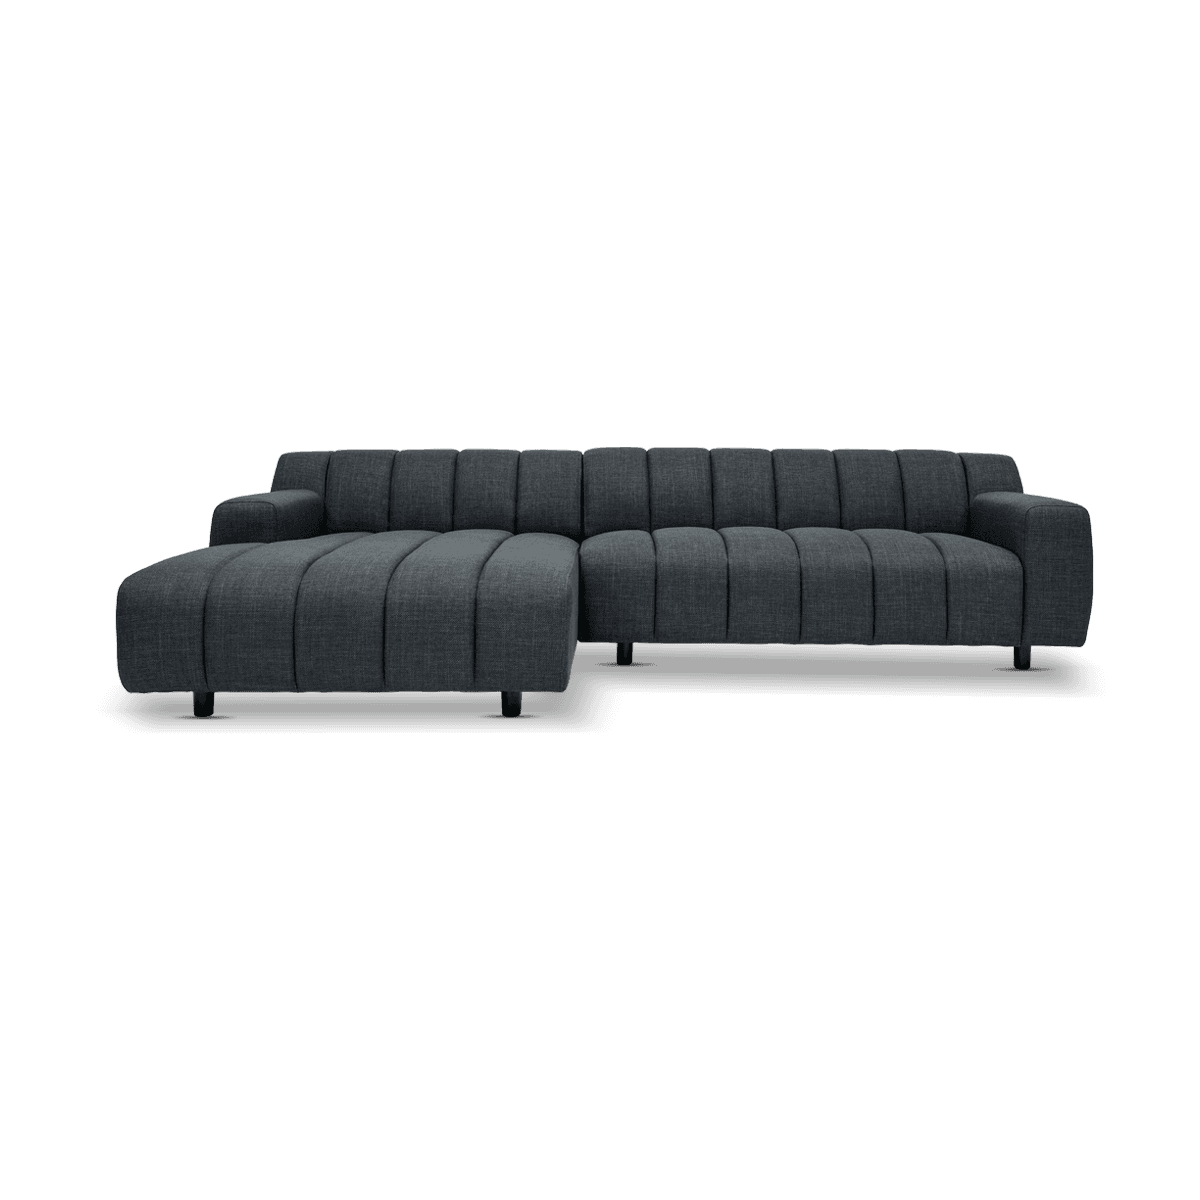 Oakland 2.5 Seater Sofa With Left Chaise longue, Dark Grey